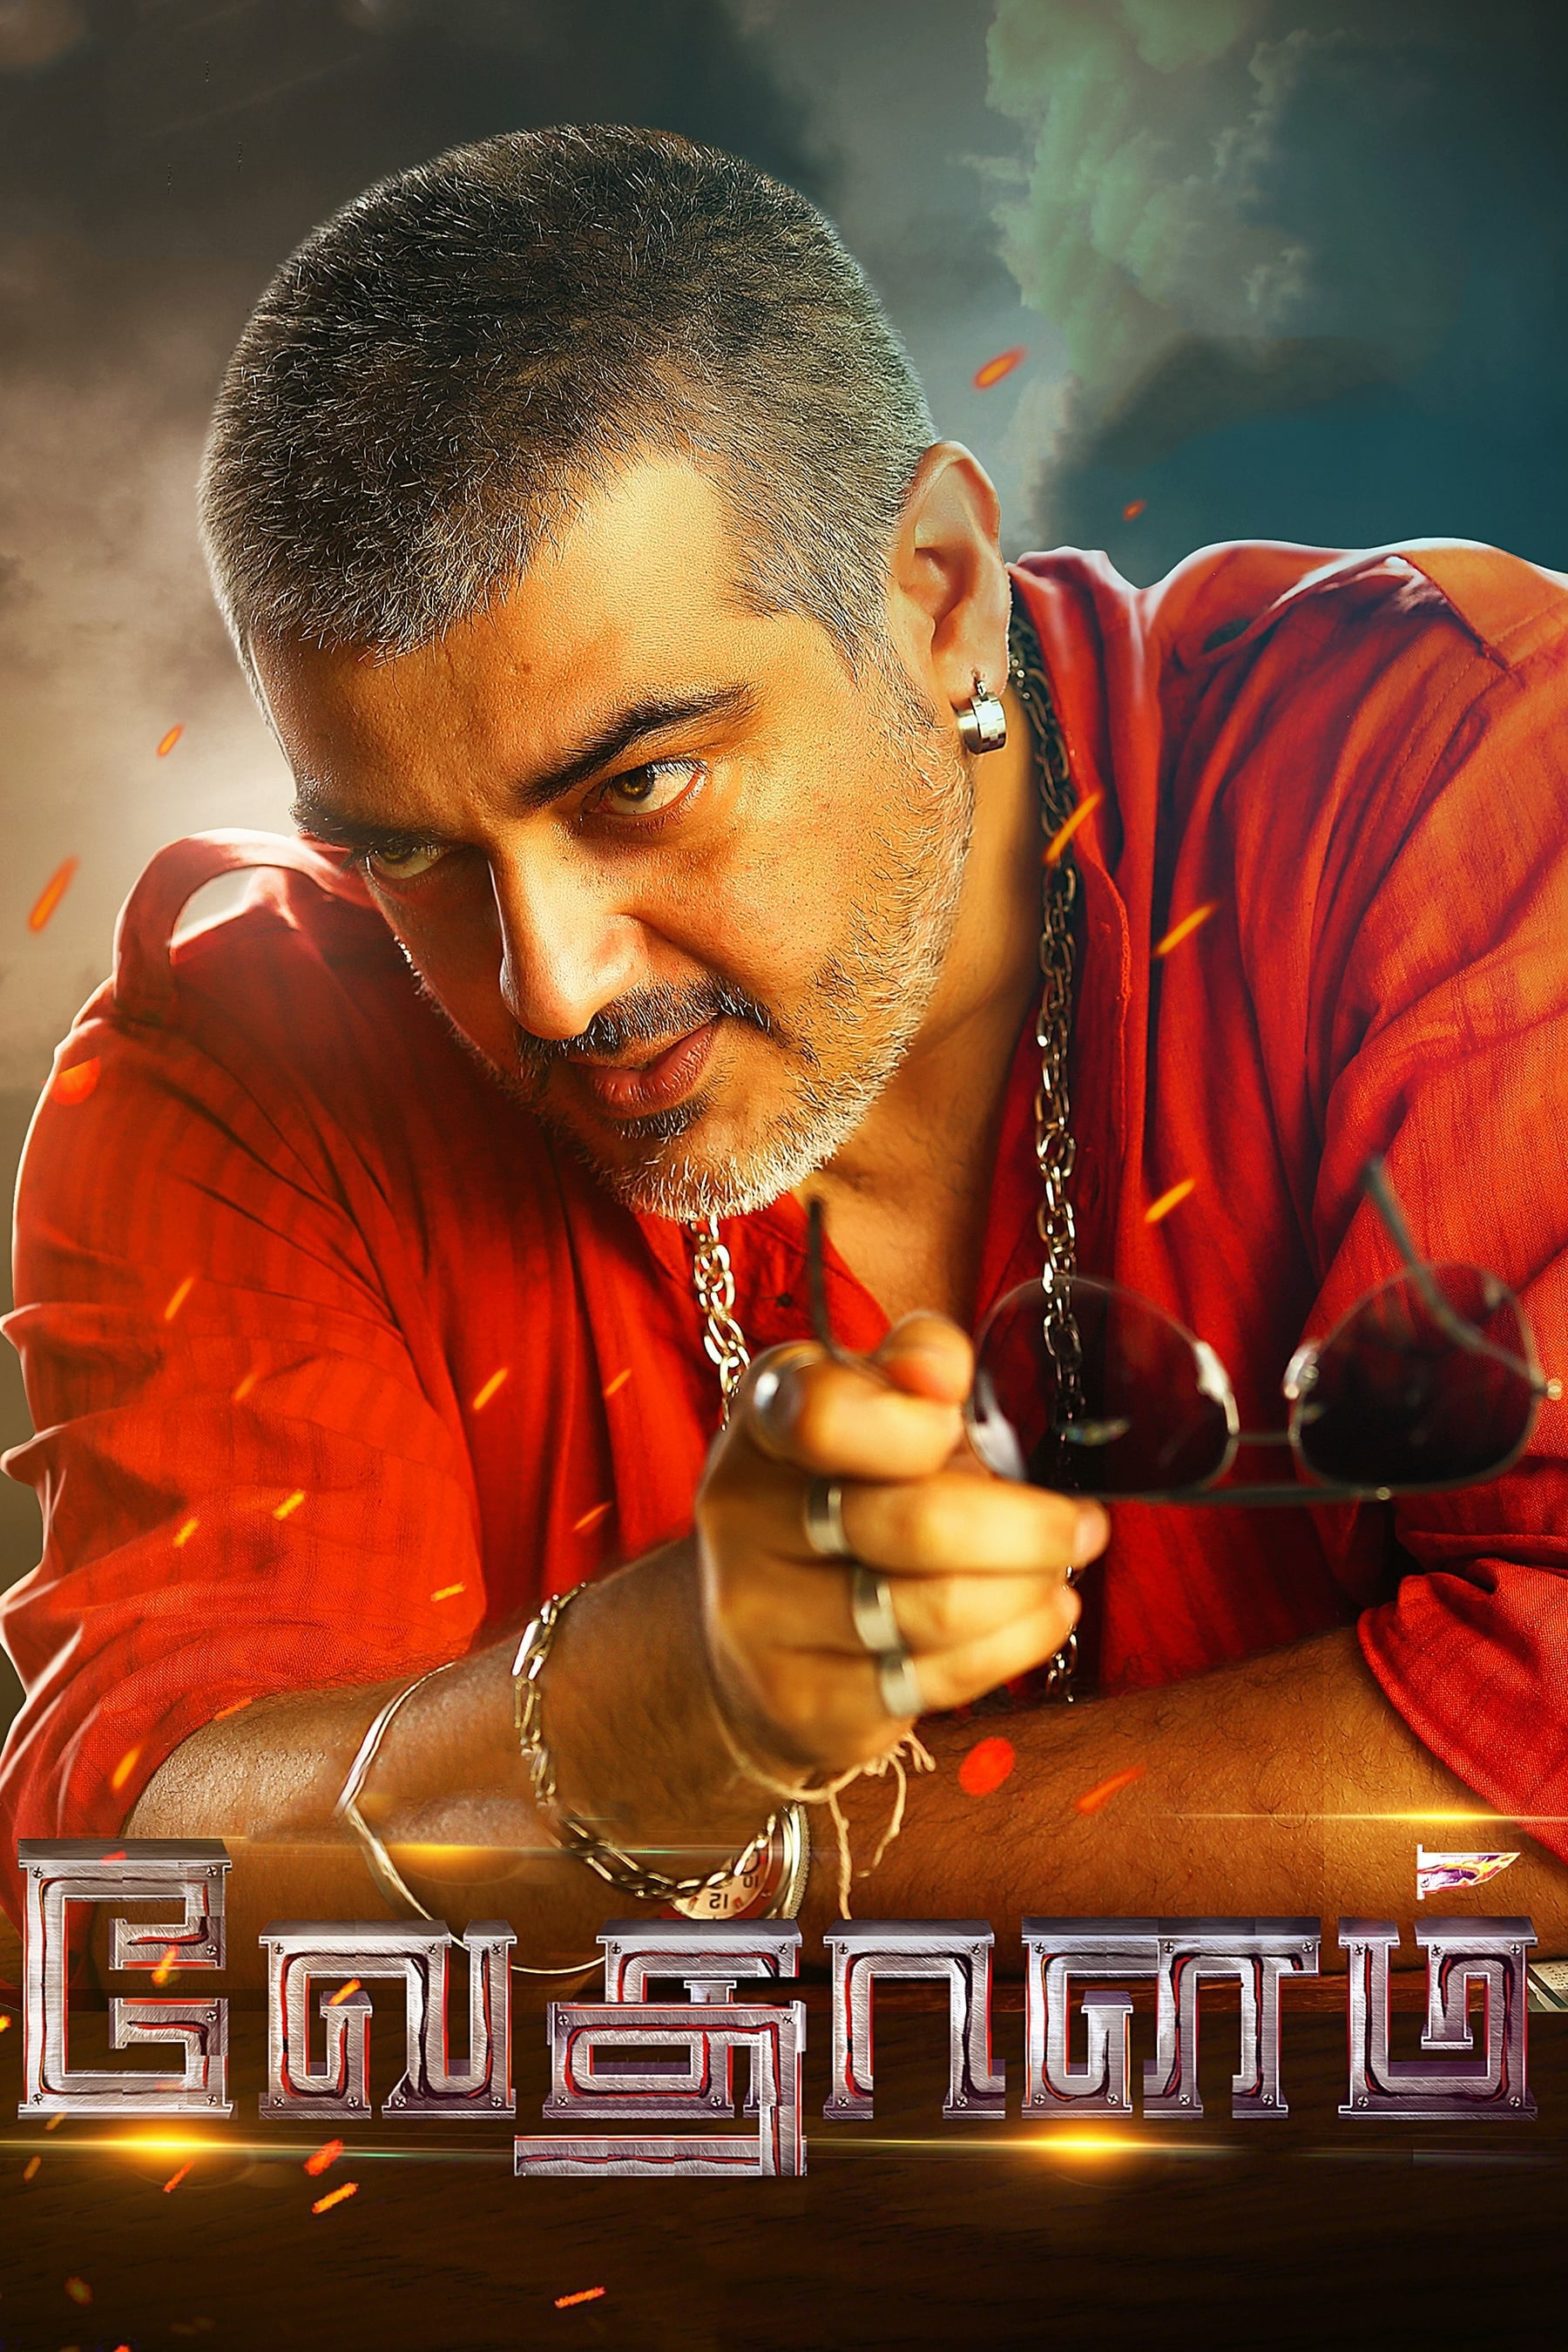 Poster for the movie "Vedhalam"